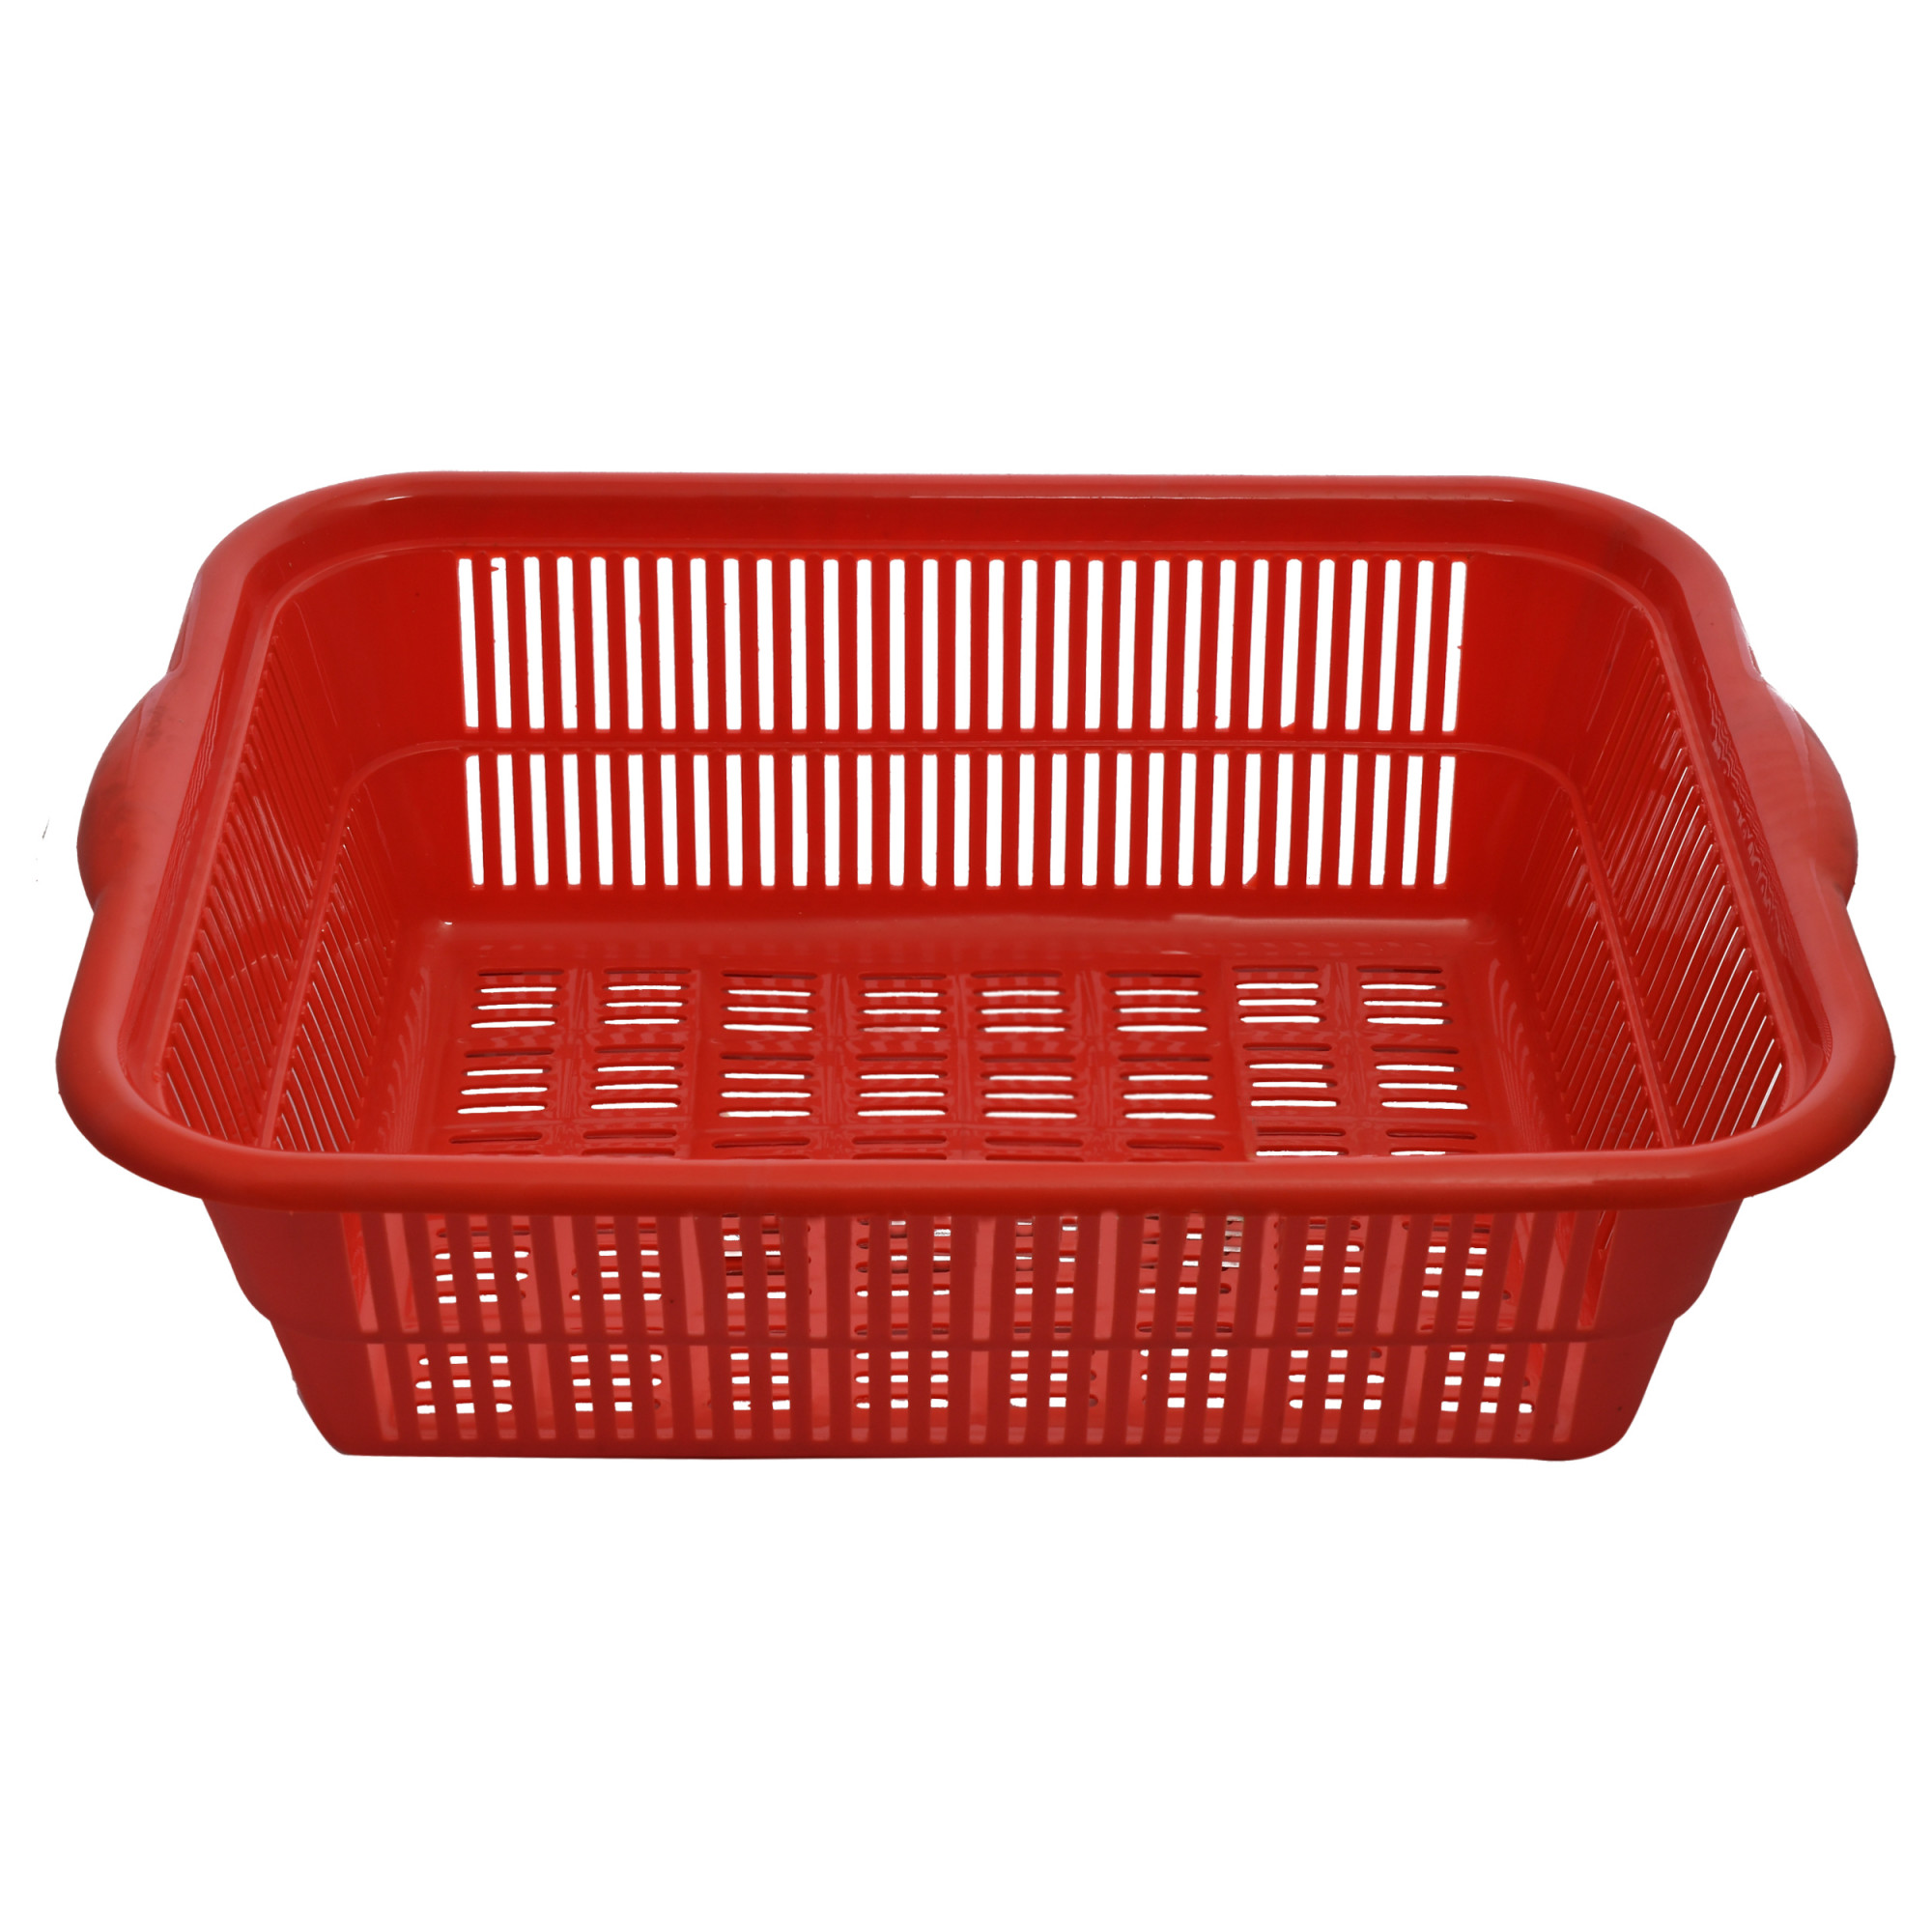 Kuber Industries Plastic Kitchen Dish Rack Drainer Vegetables And Fruits Basket Dish Rack Multipurpose Organizers ,Small Size,Blue & Red